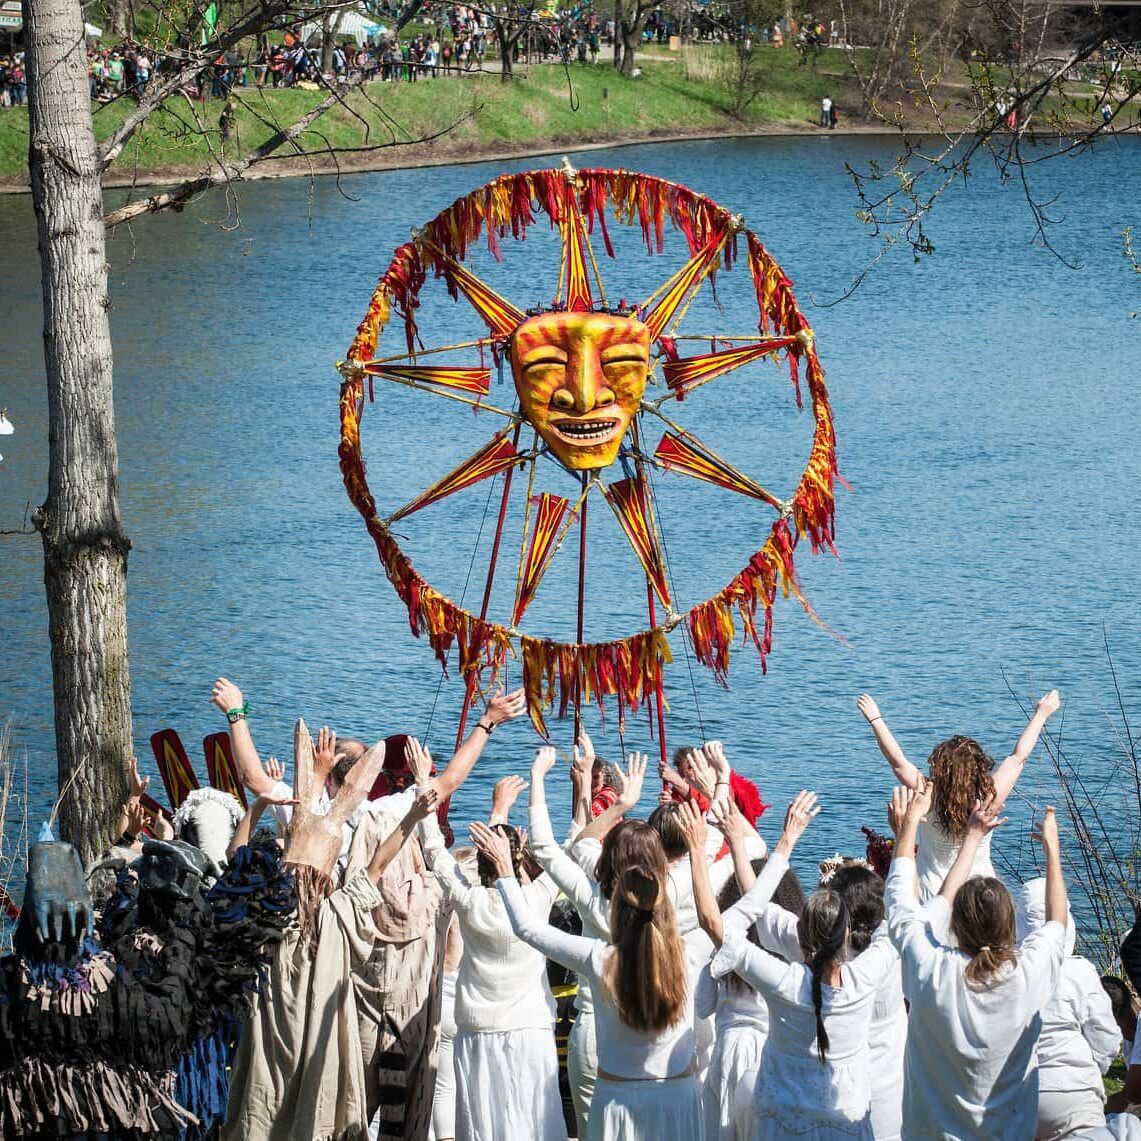 Image Description: A group of people stand together raising their arms. A few of them are holding up a large puppet that is a sun with a face. They are all in front of a lake.